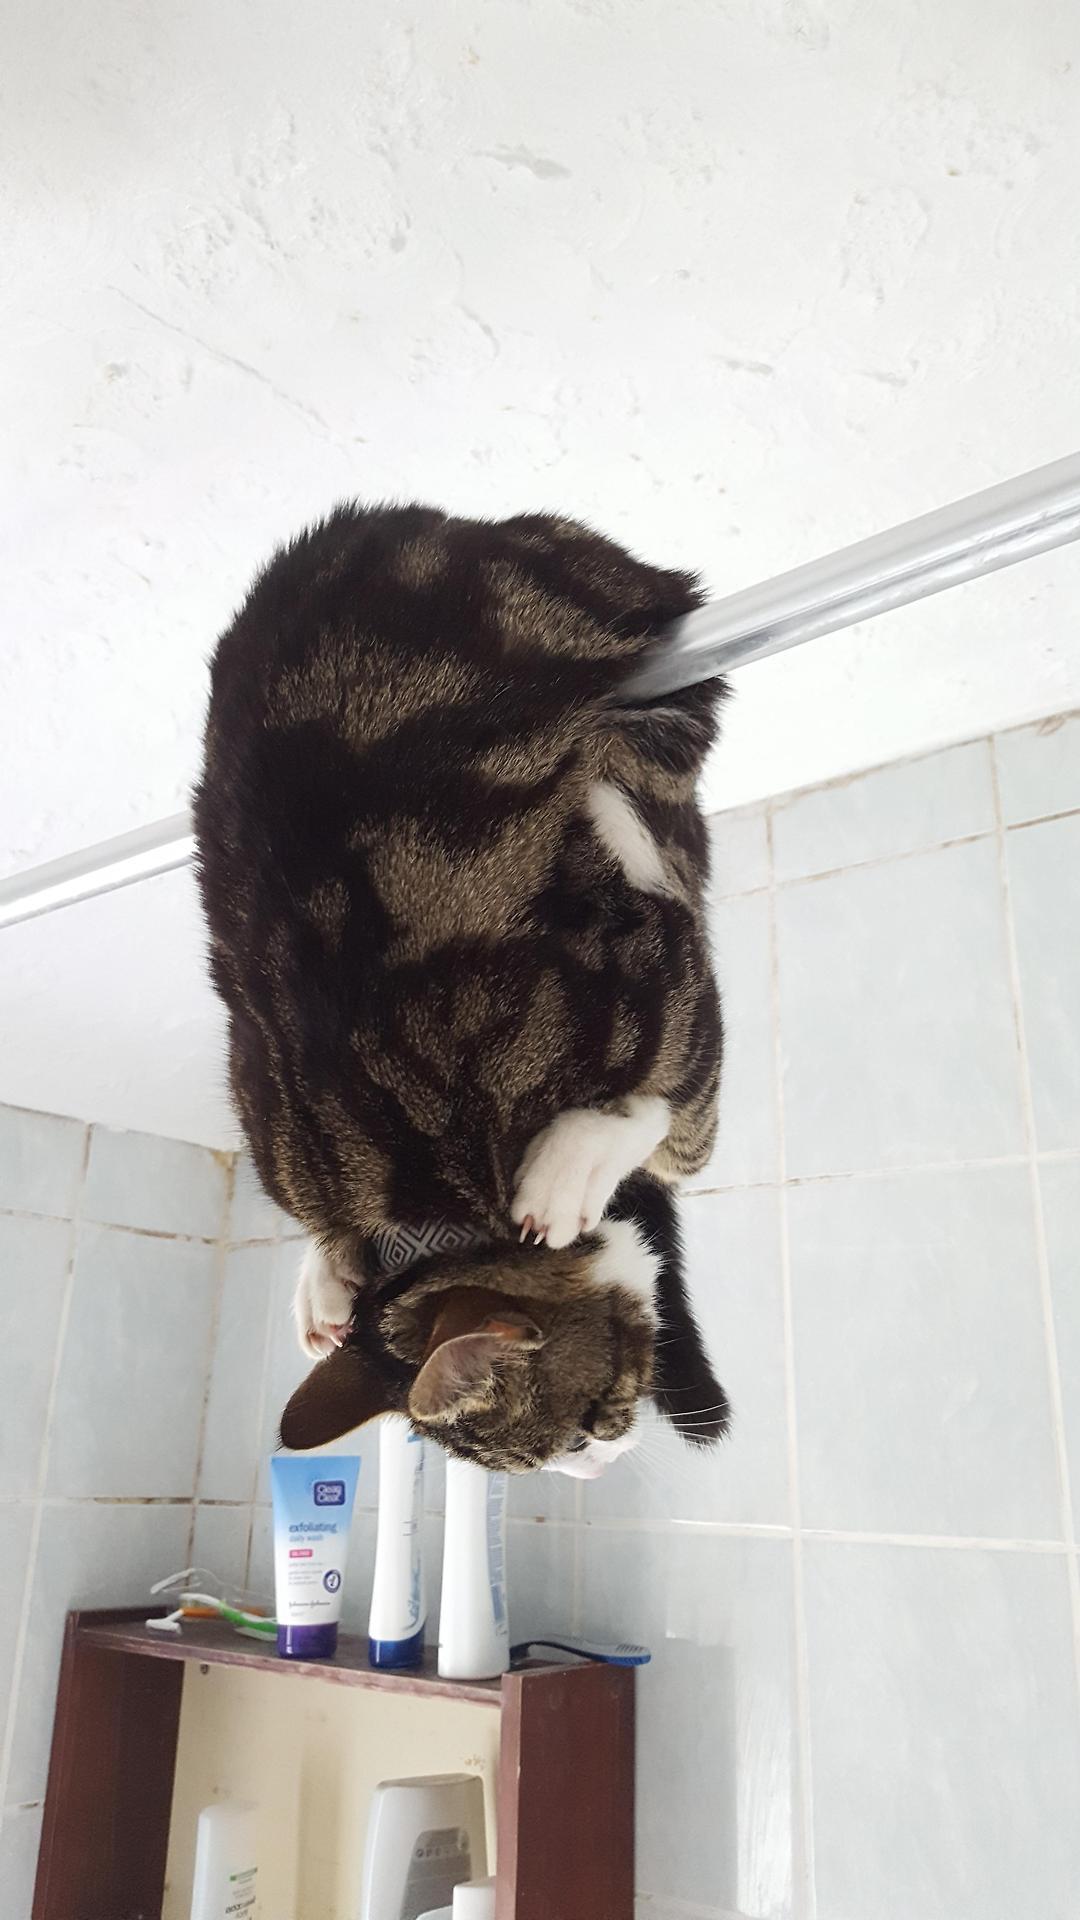 This is how my friend found the cat in the bathroom (Source: http://ift.tt/2maeYms)